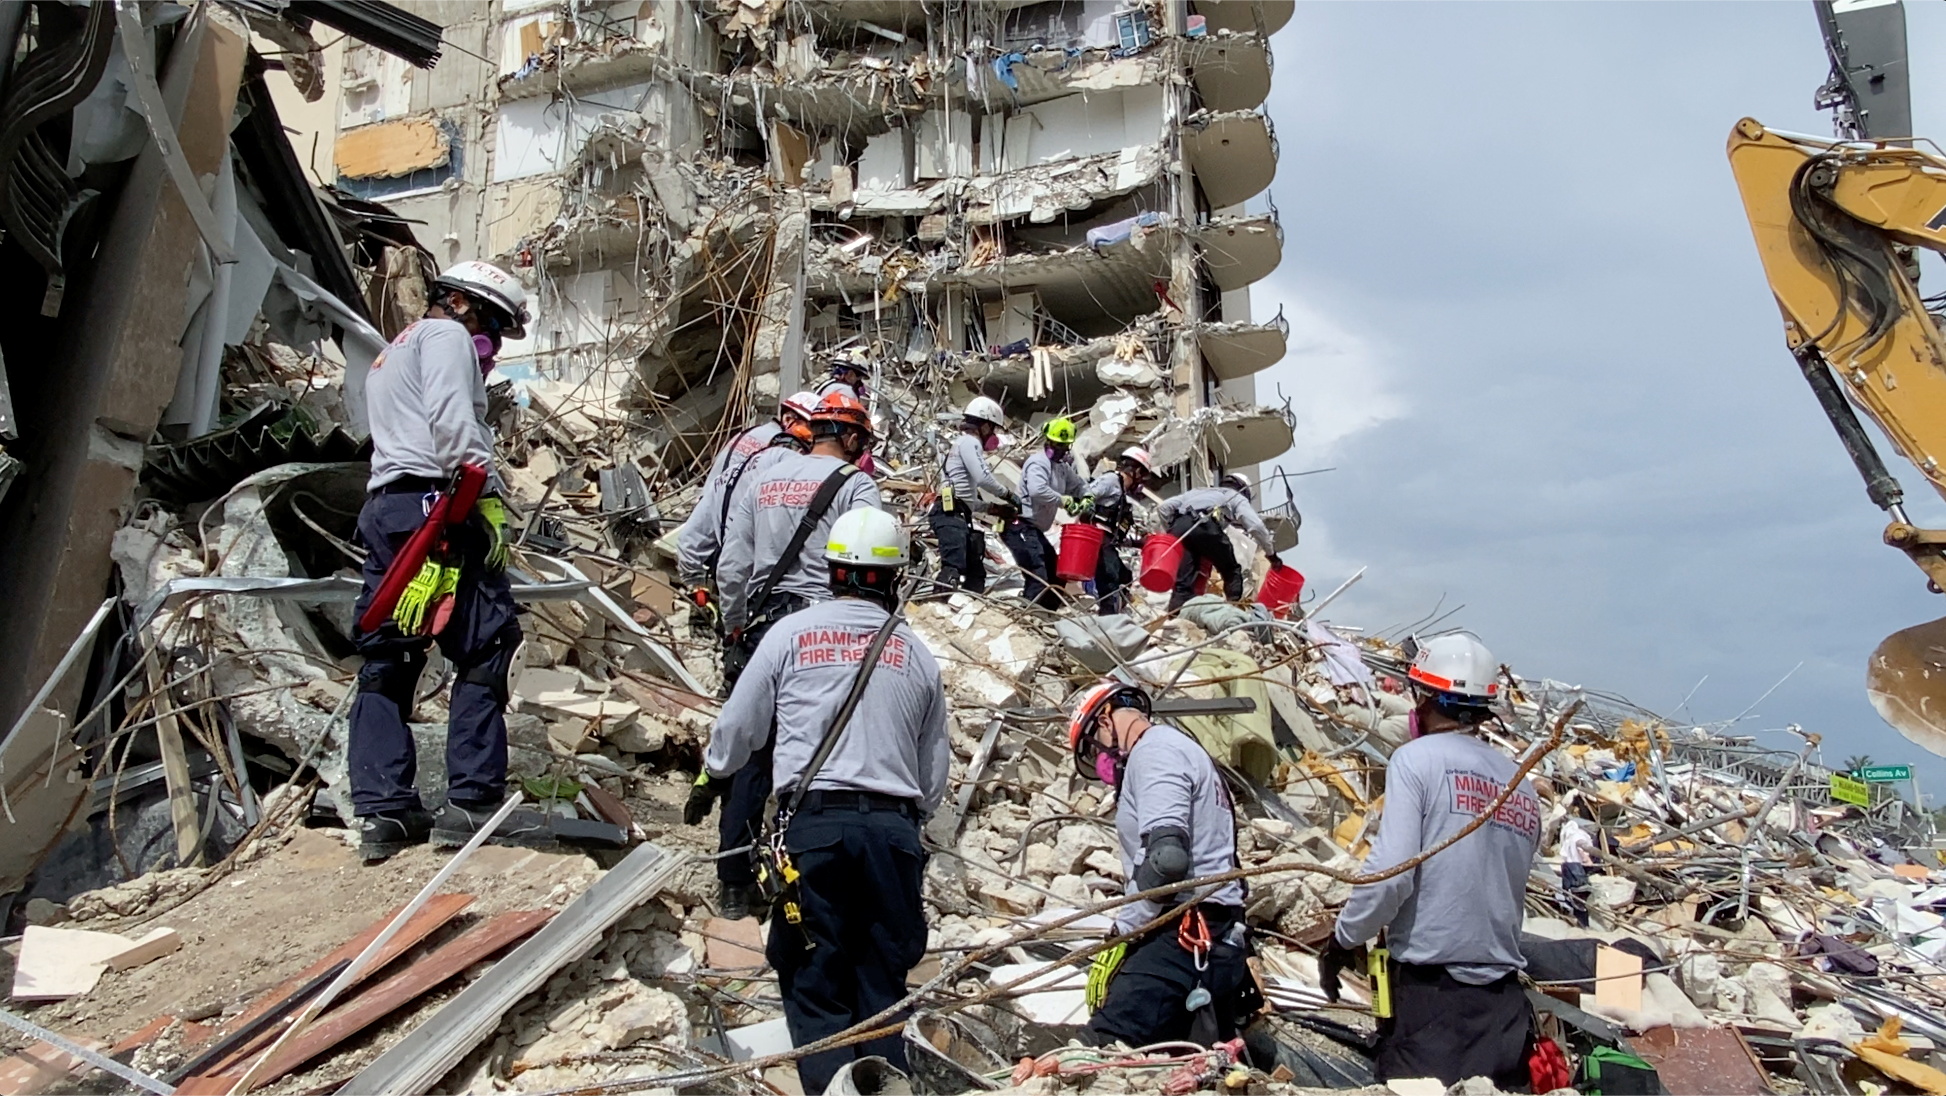 Resuce crew respond at the site after a partial building collapse in Surfside near Miami Beach, Florida, U.S., June 25, 2021, in this still image obtained from video. Courtesy of Miami-Dade Fire Rescue / Florida Task Force One / via REUTERS